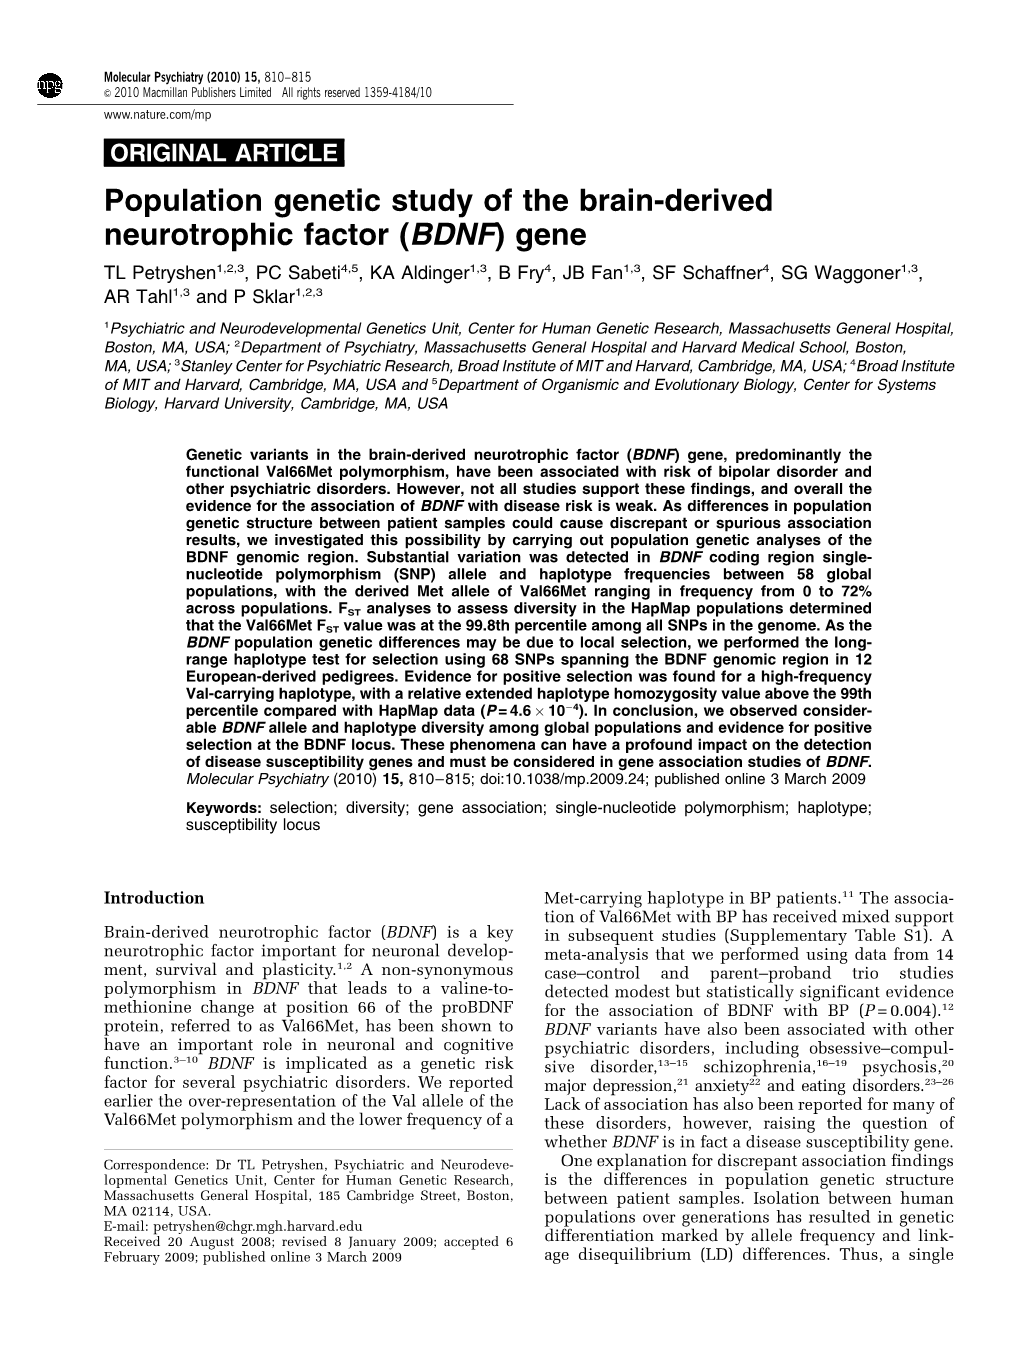 Population Genetic Study of the Brain-Derived Neurotrophic Factor